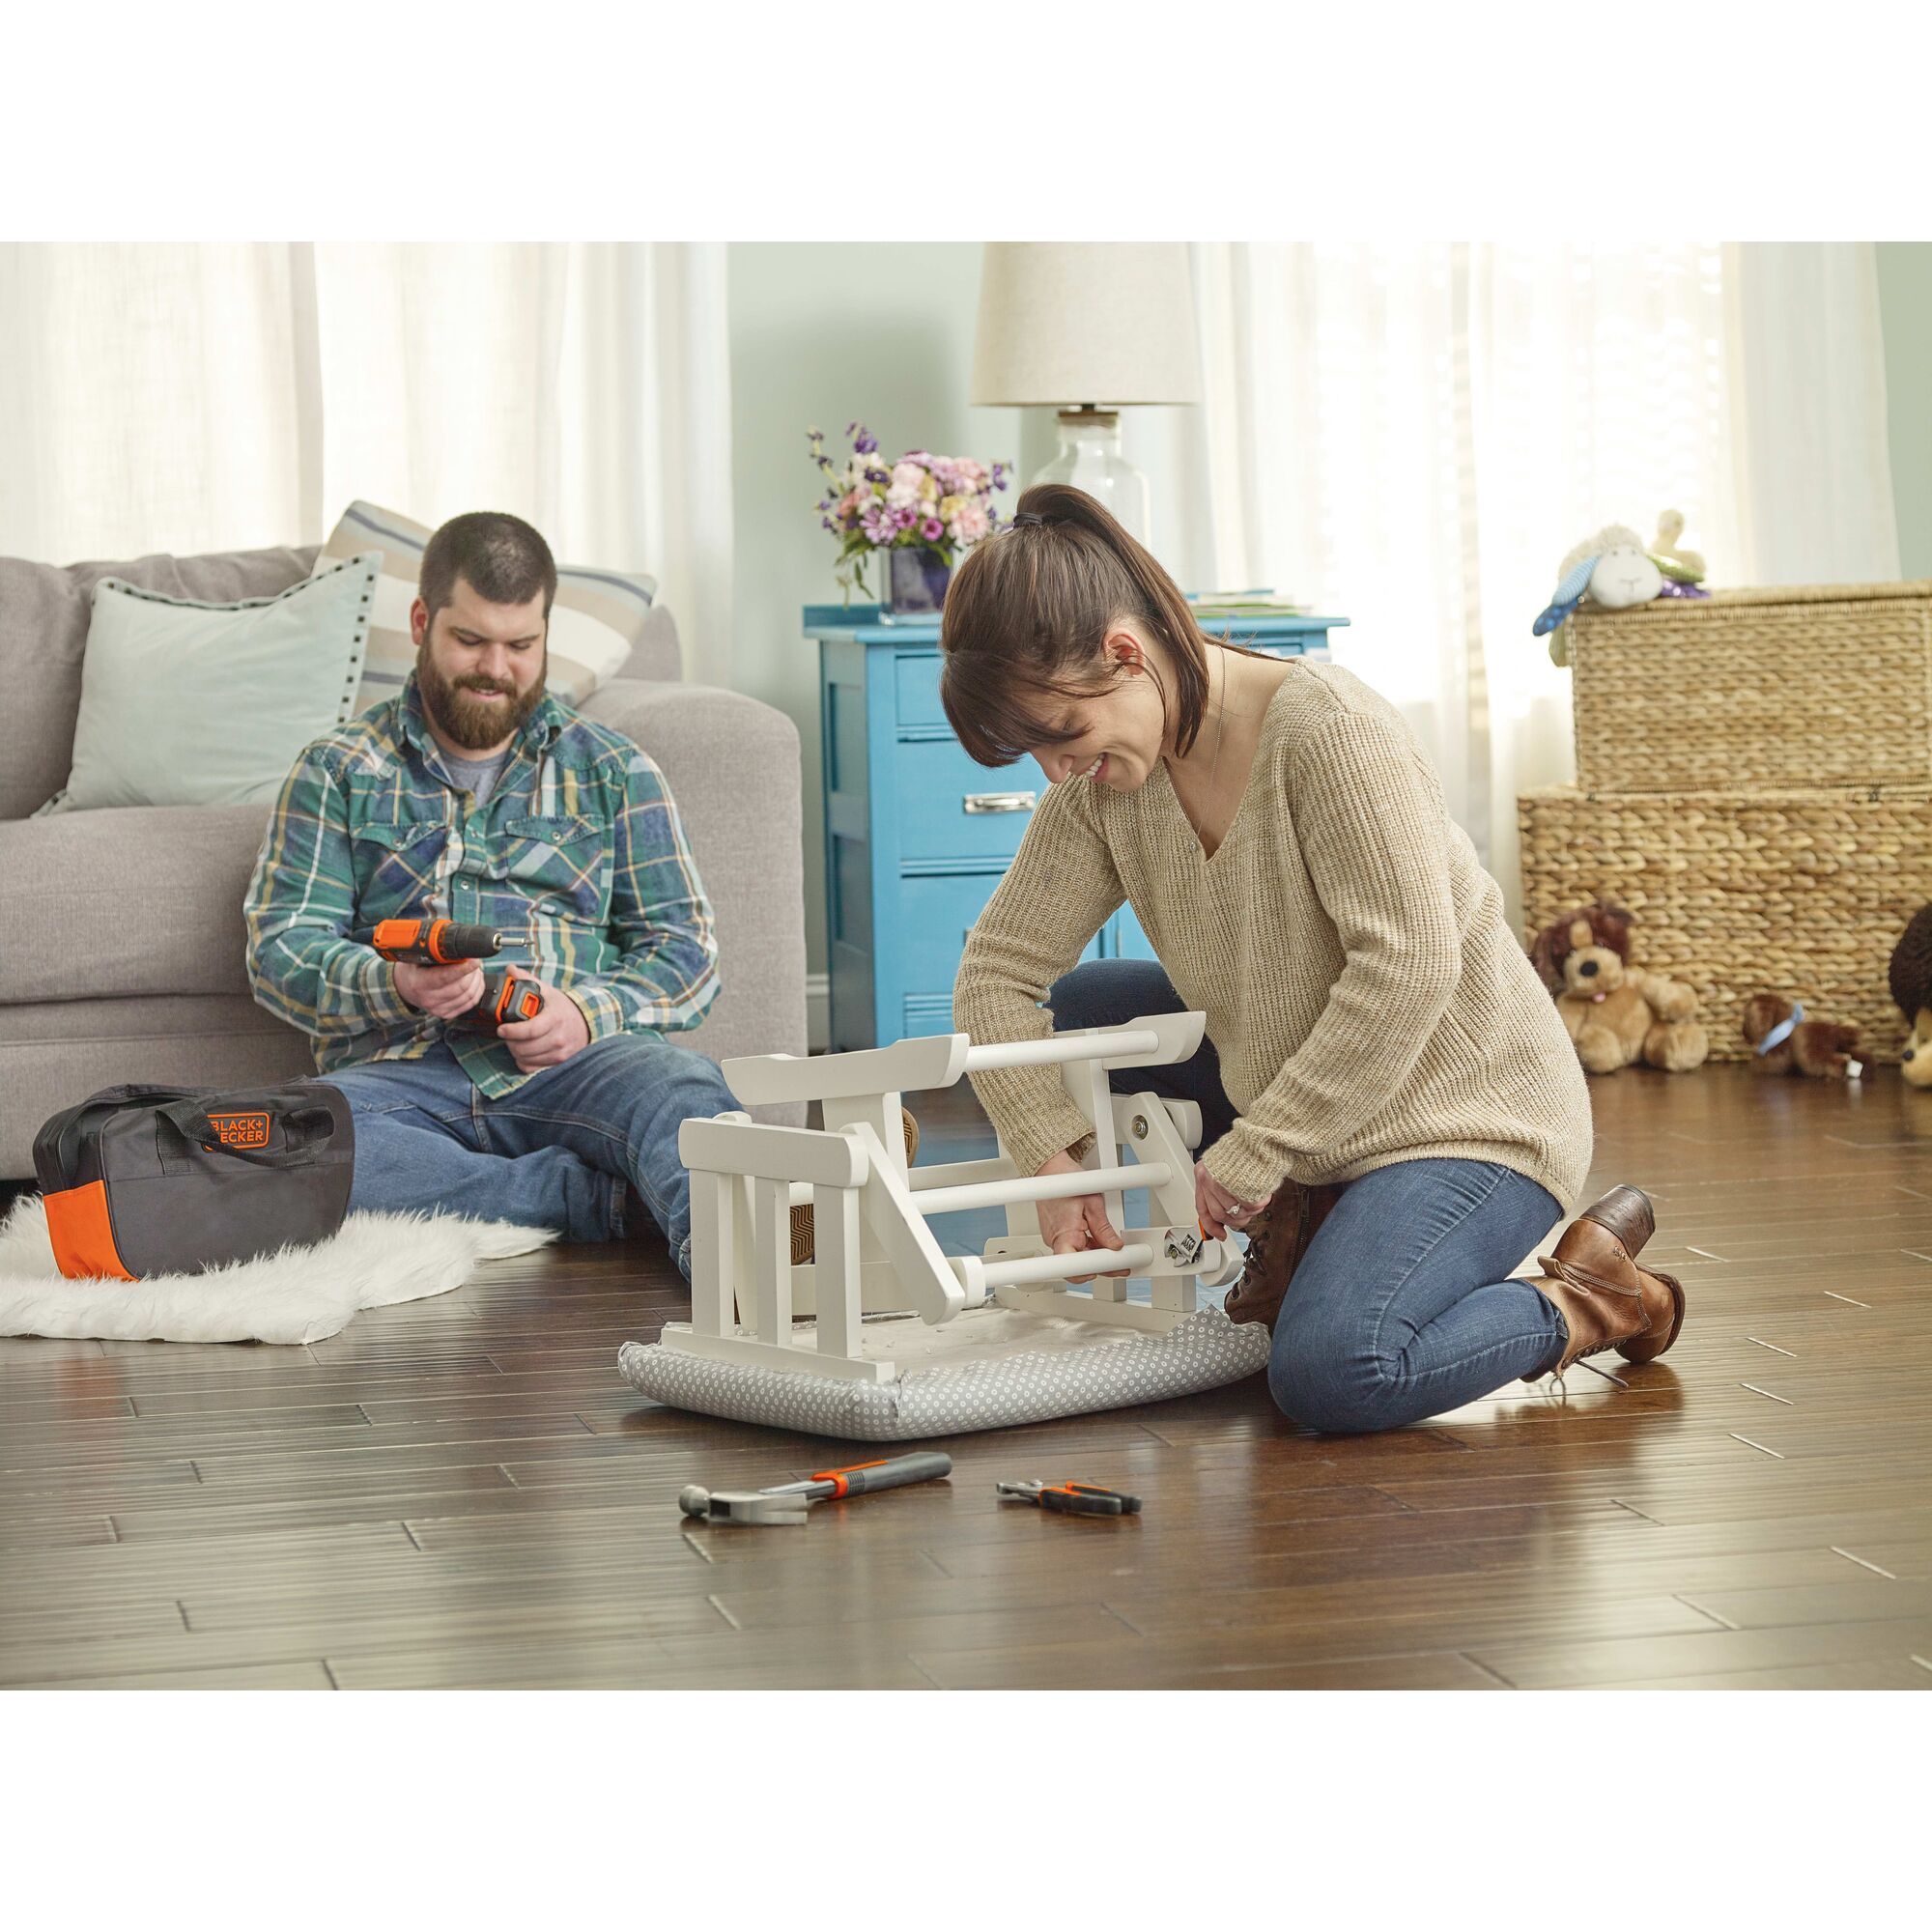 Woman assembling an ottoman with the contents of the BLACK+DECKER Home Tool Kit